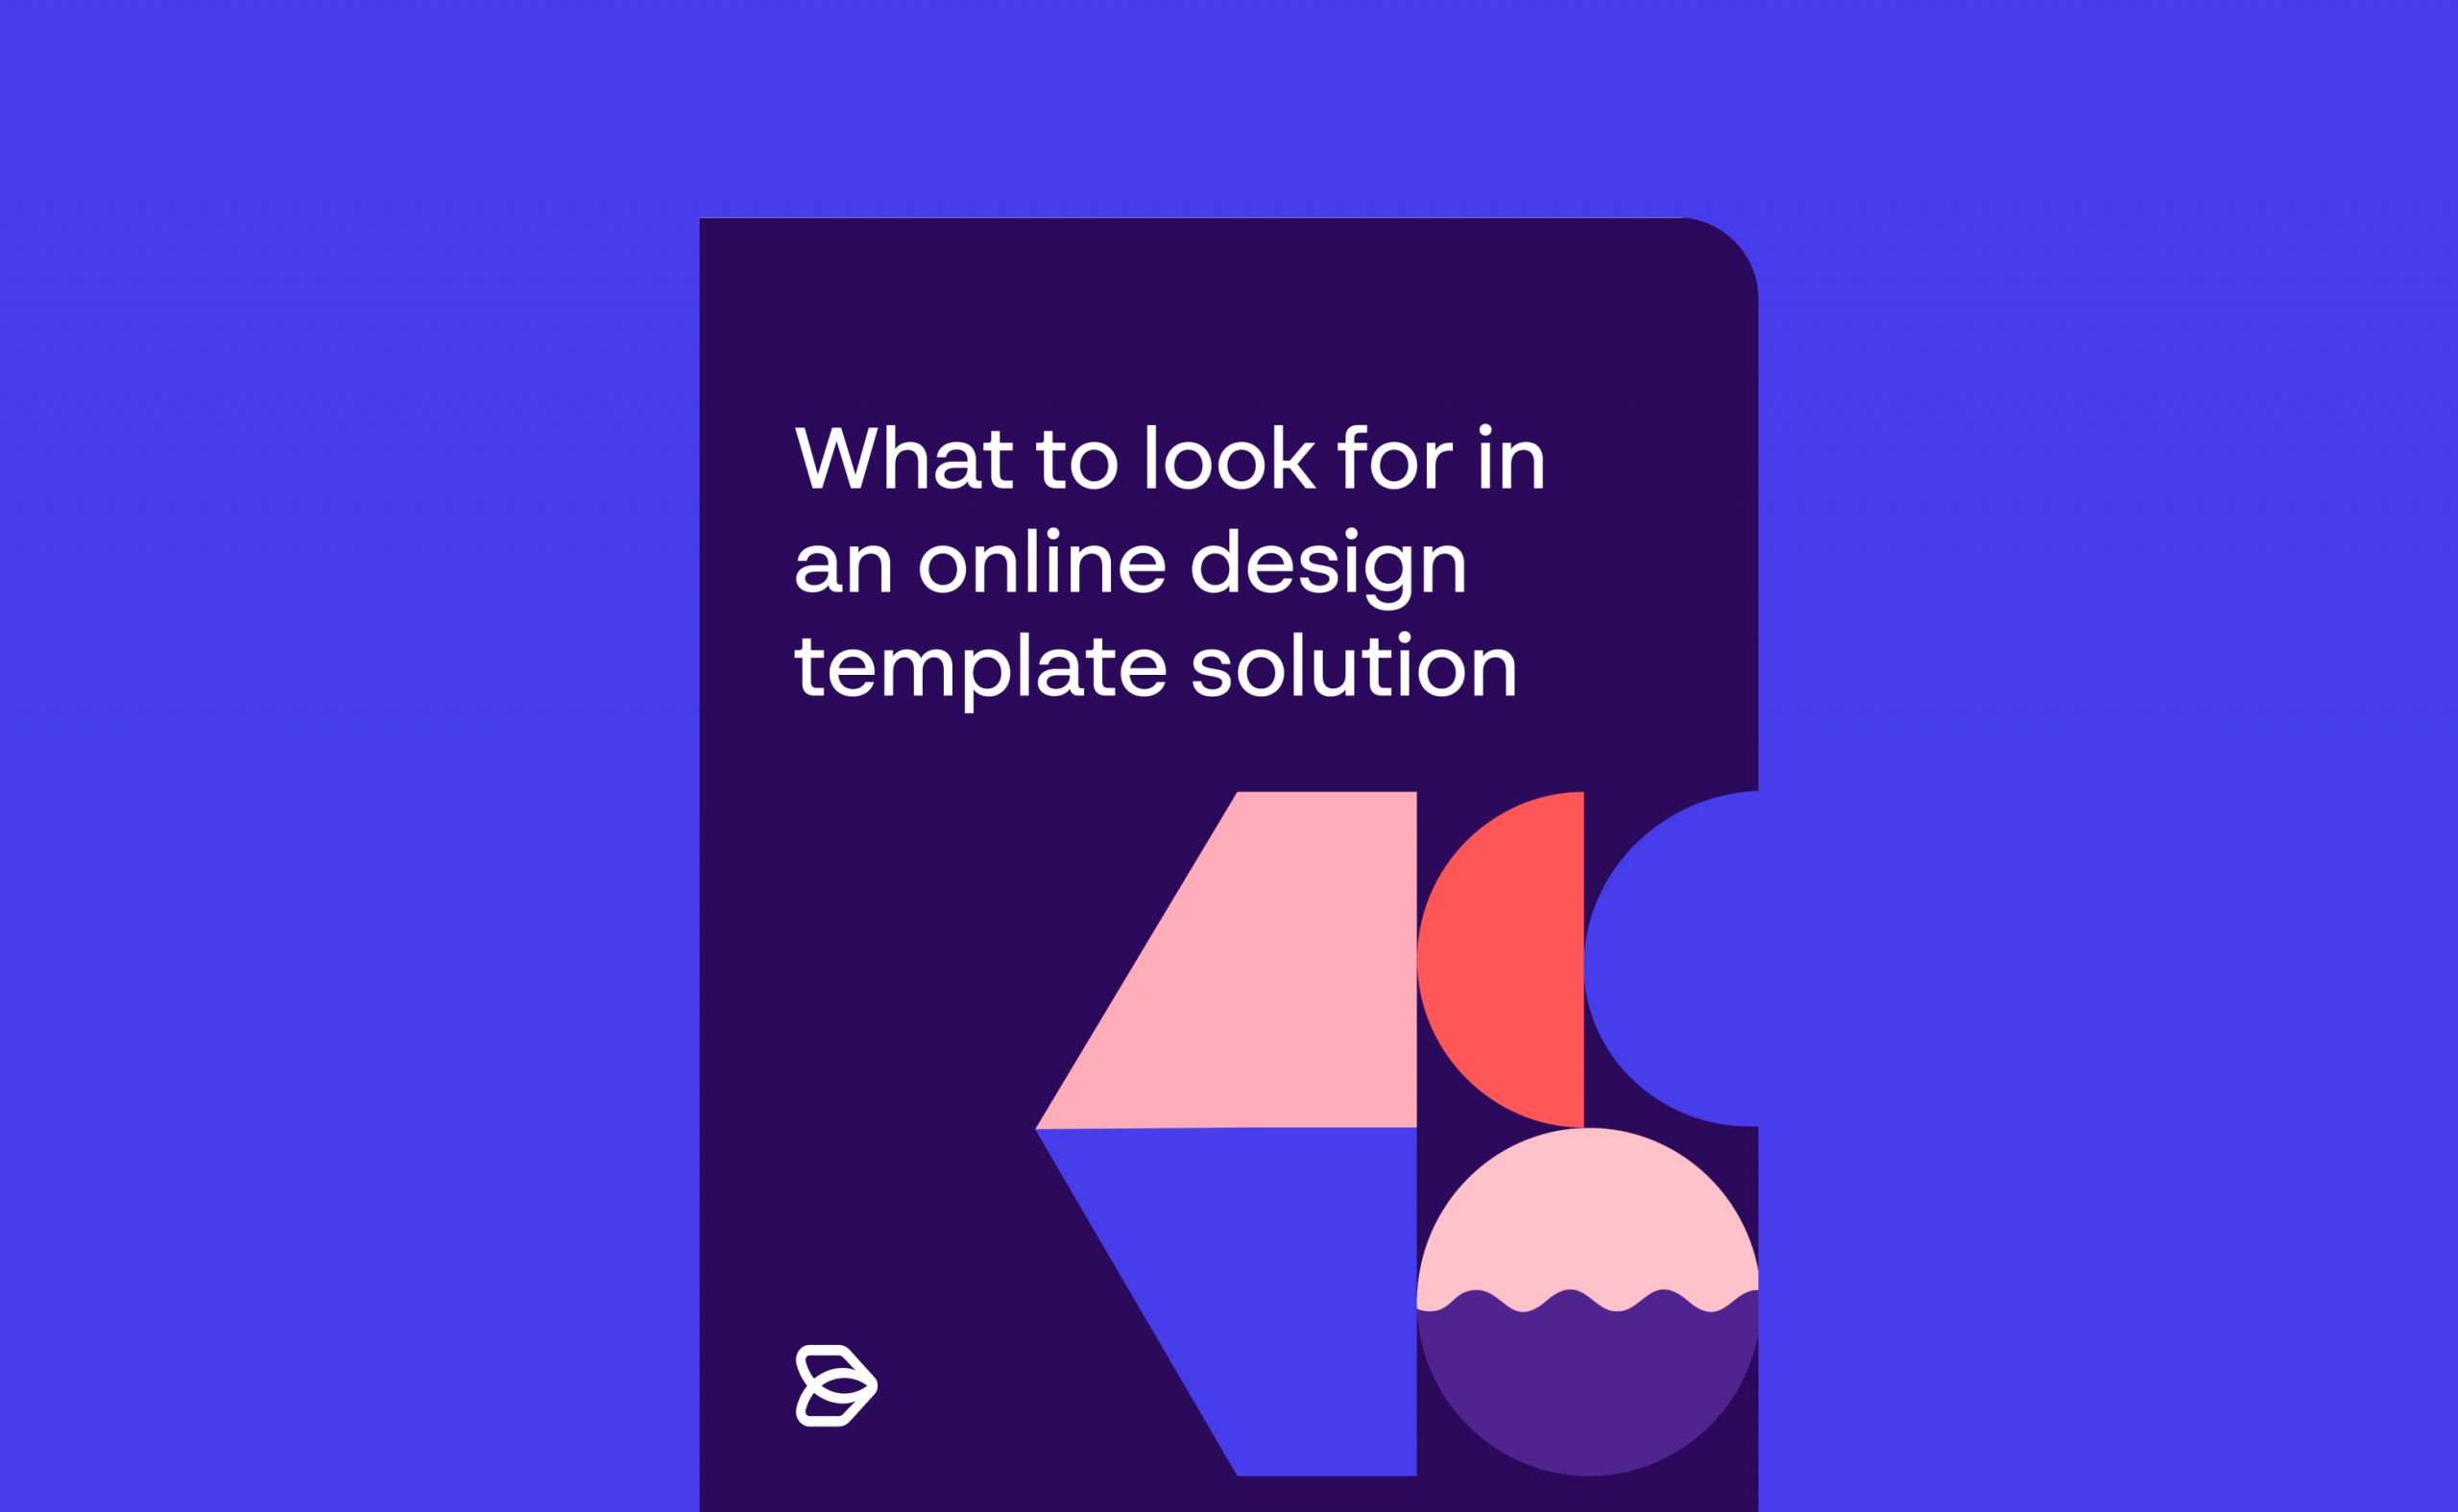 What to look for in an online design template solution